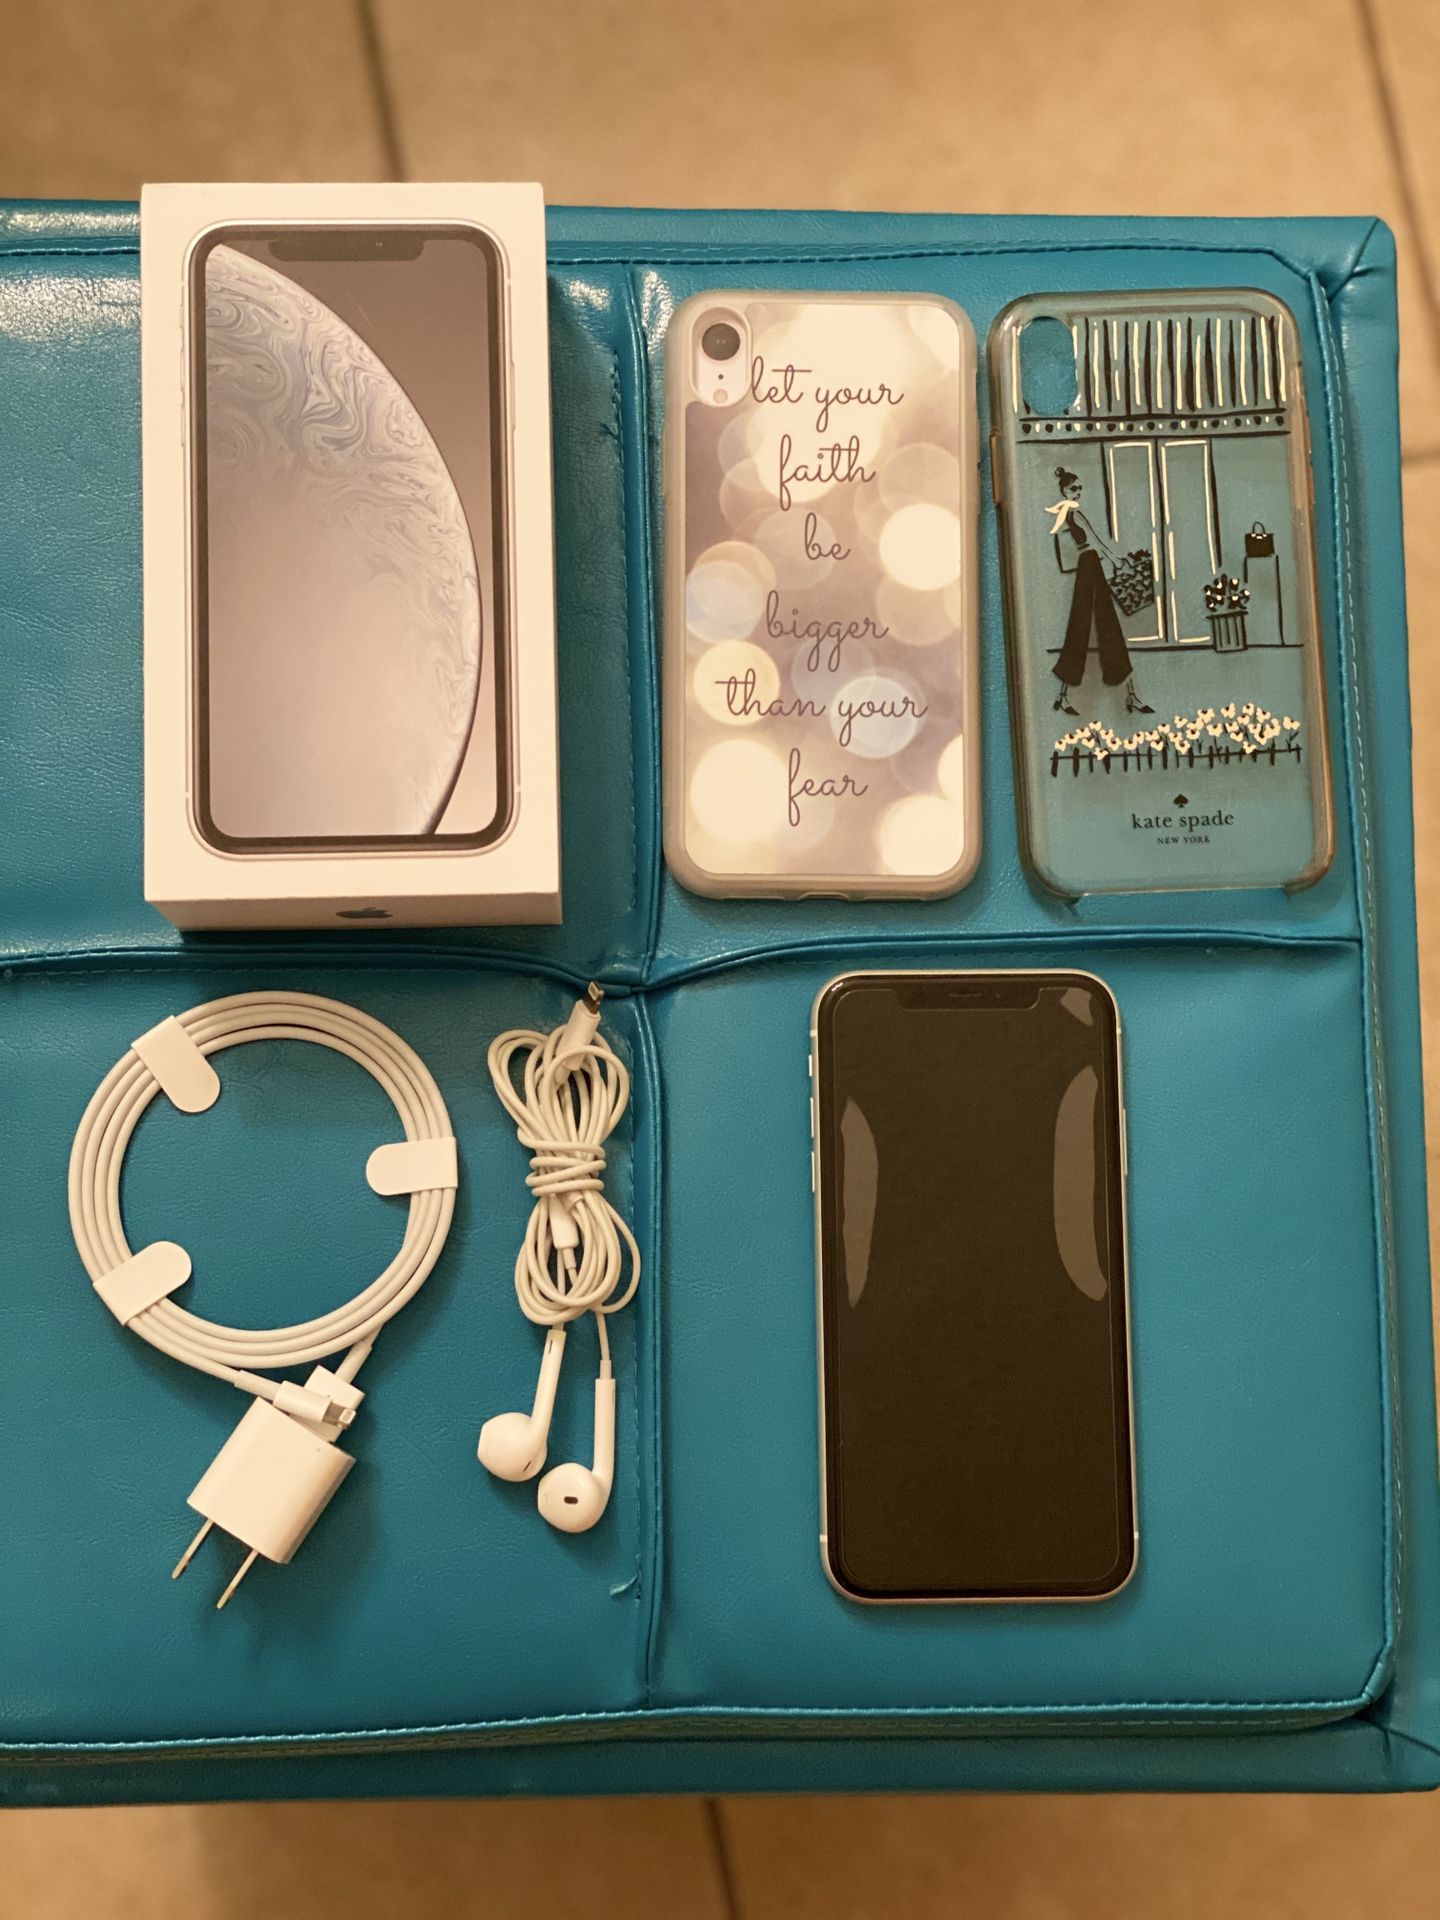 Iphone XR 64 gb ATT like new (no scratches)(2 cases inclued)